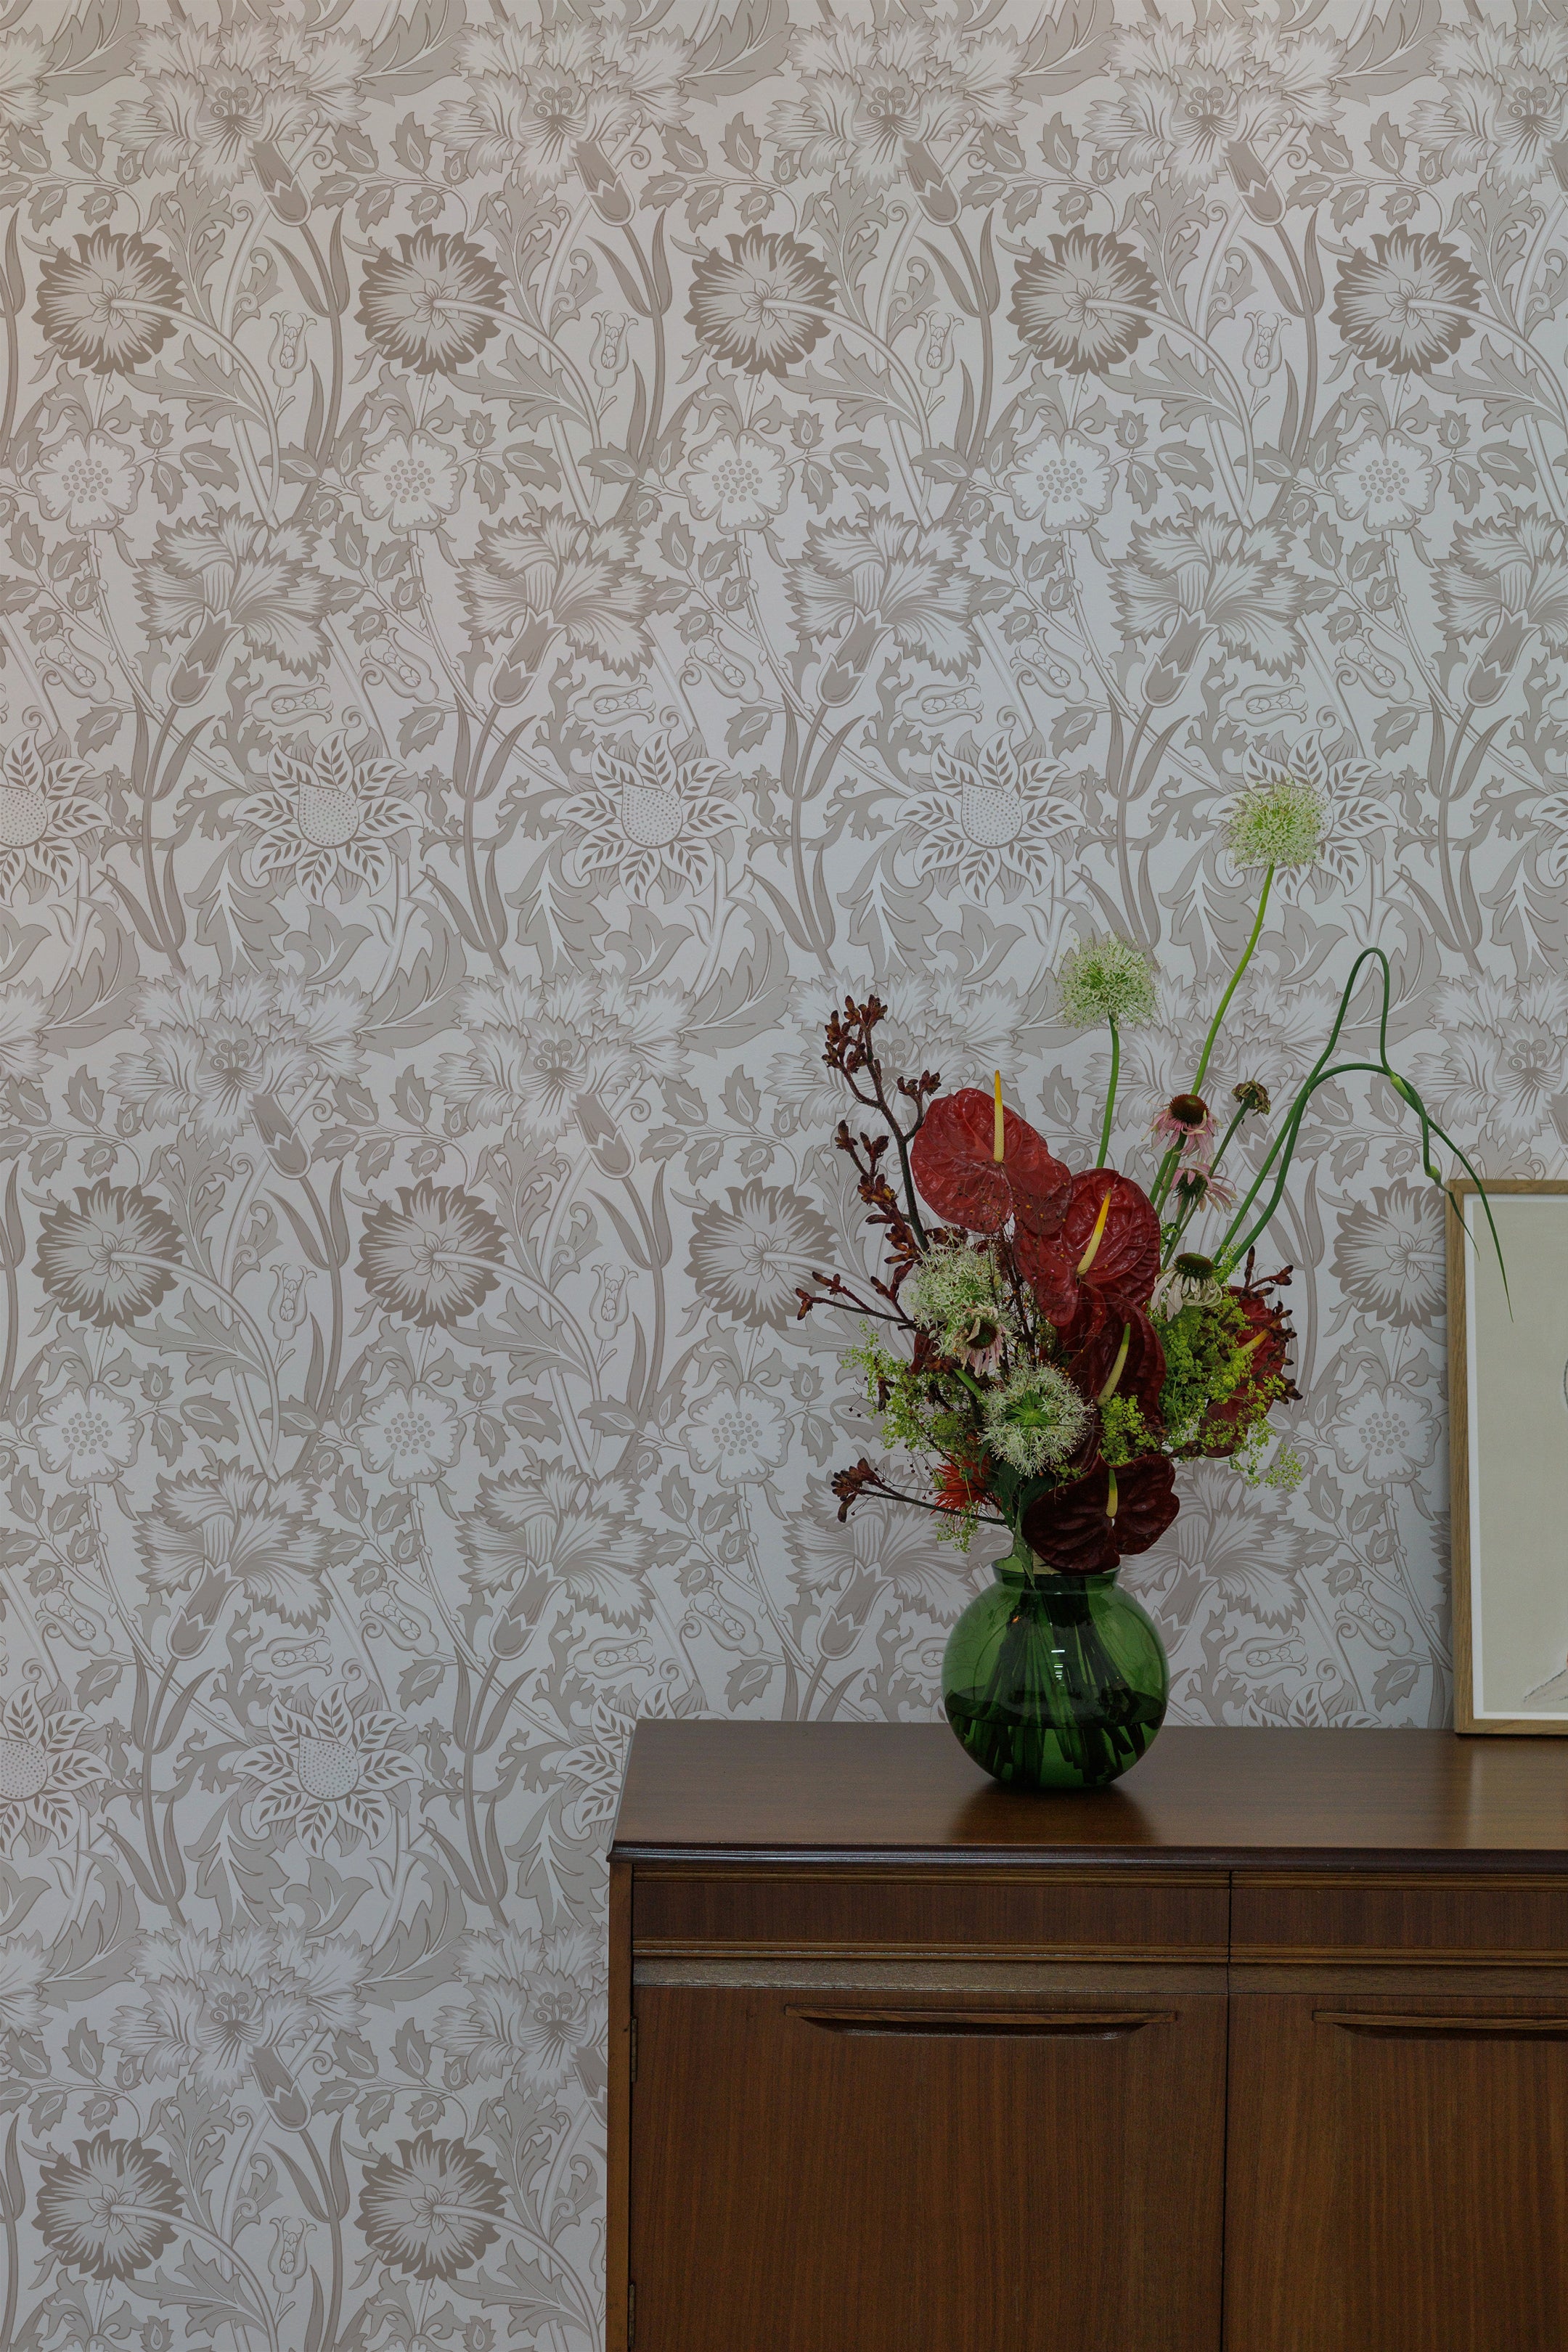 A beautiful floral arrangement in a green glass vase sits on a wooden sideboard, set against a wall covered with Garden Delight wallpaper. The wallpaper's beige floral pattern enhances the natural beauty of the flowers, adding a touch of elegance to the decor.